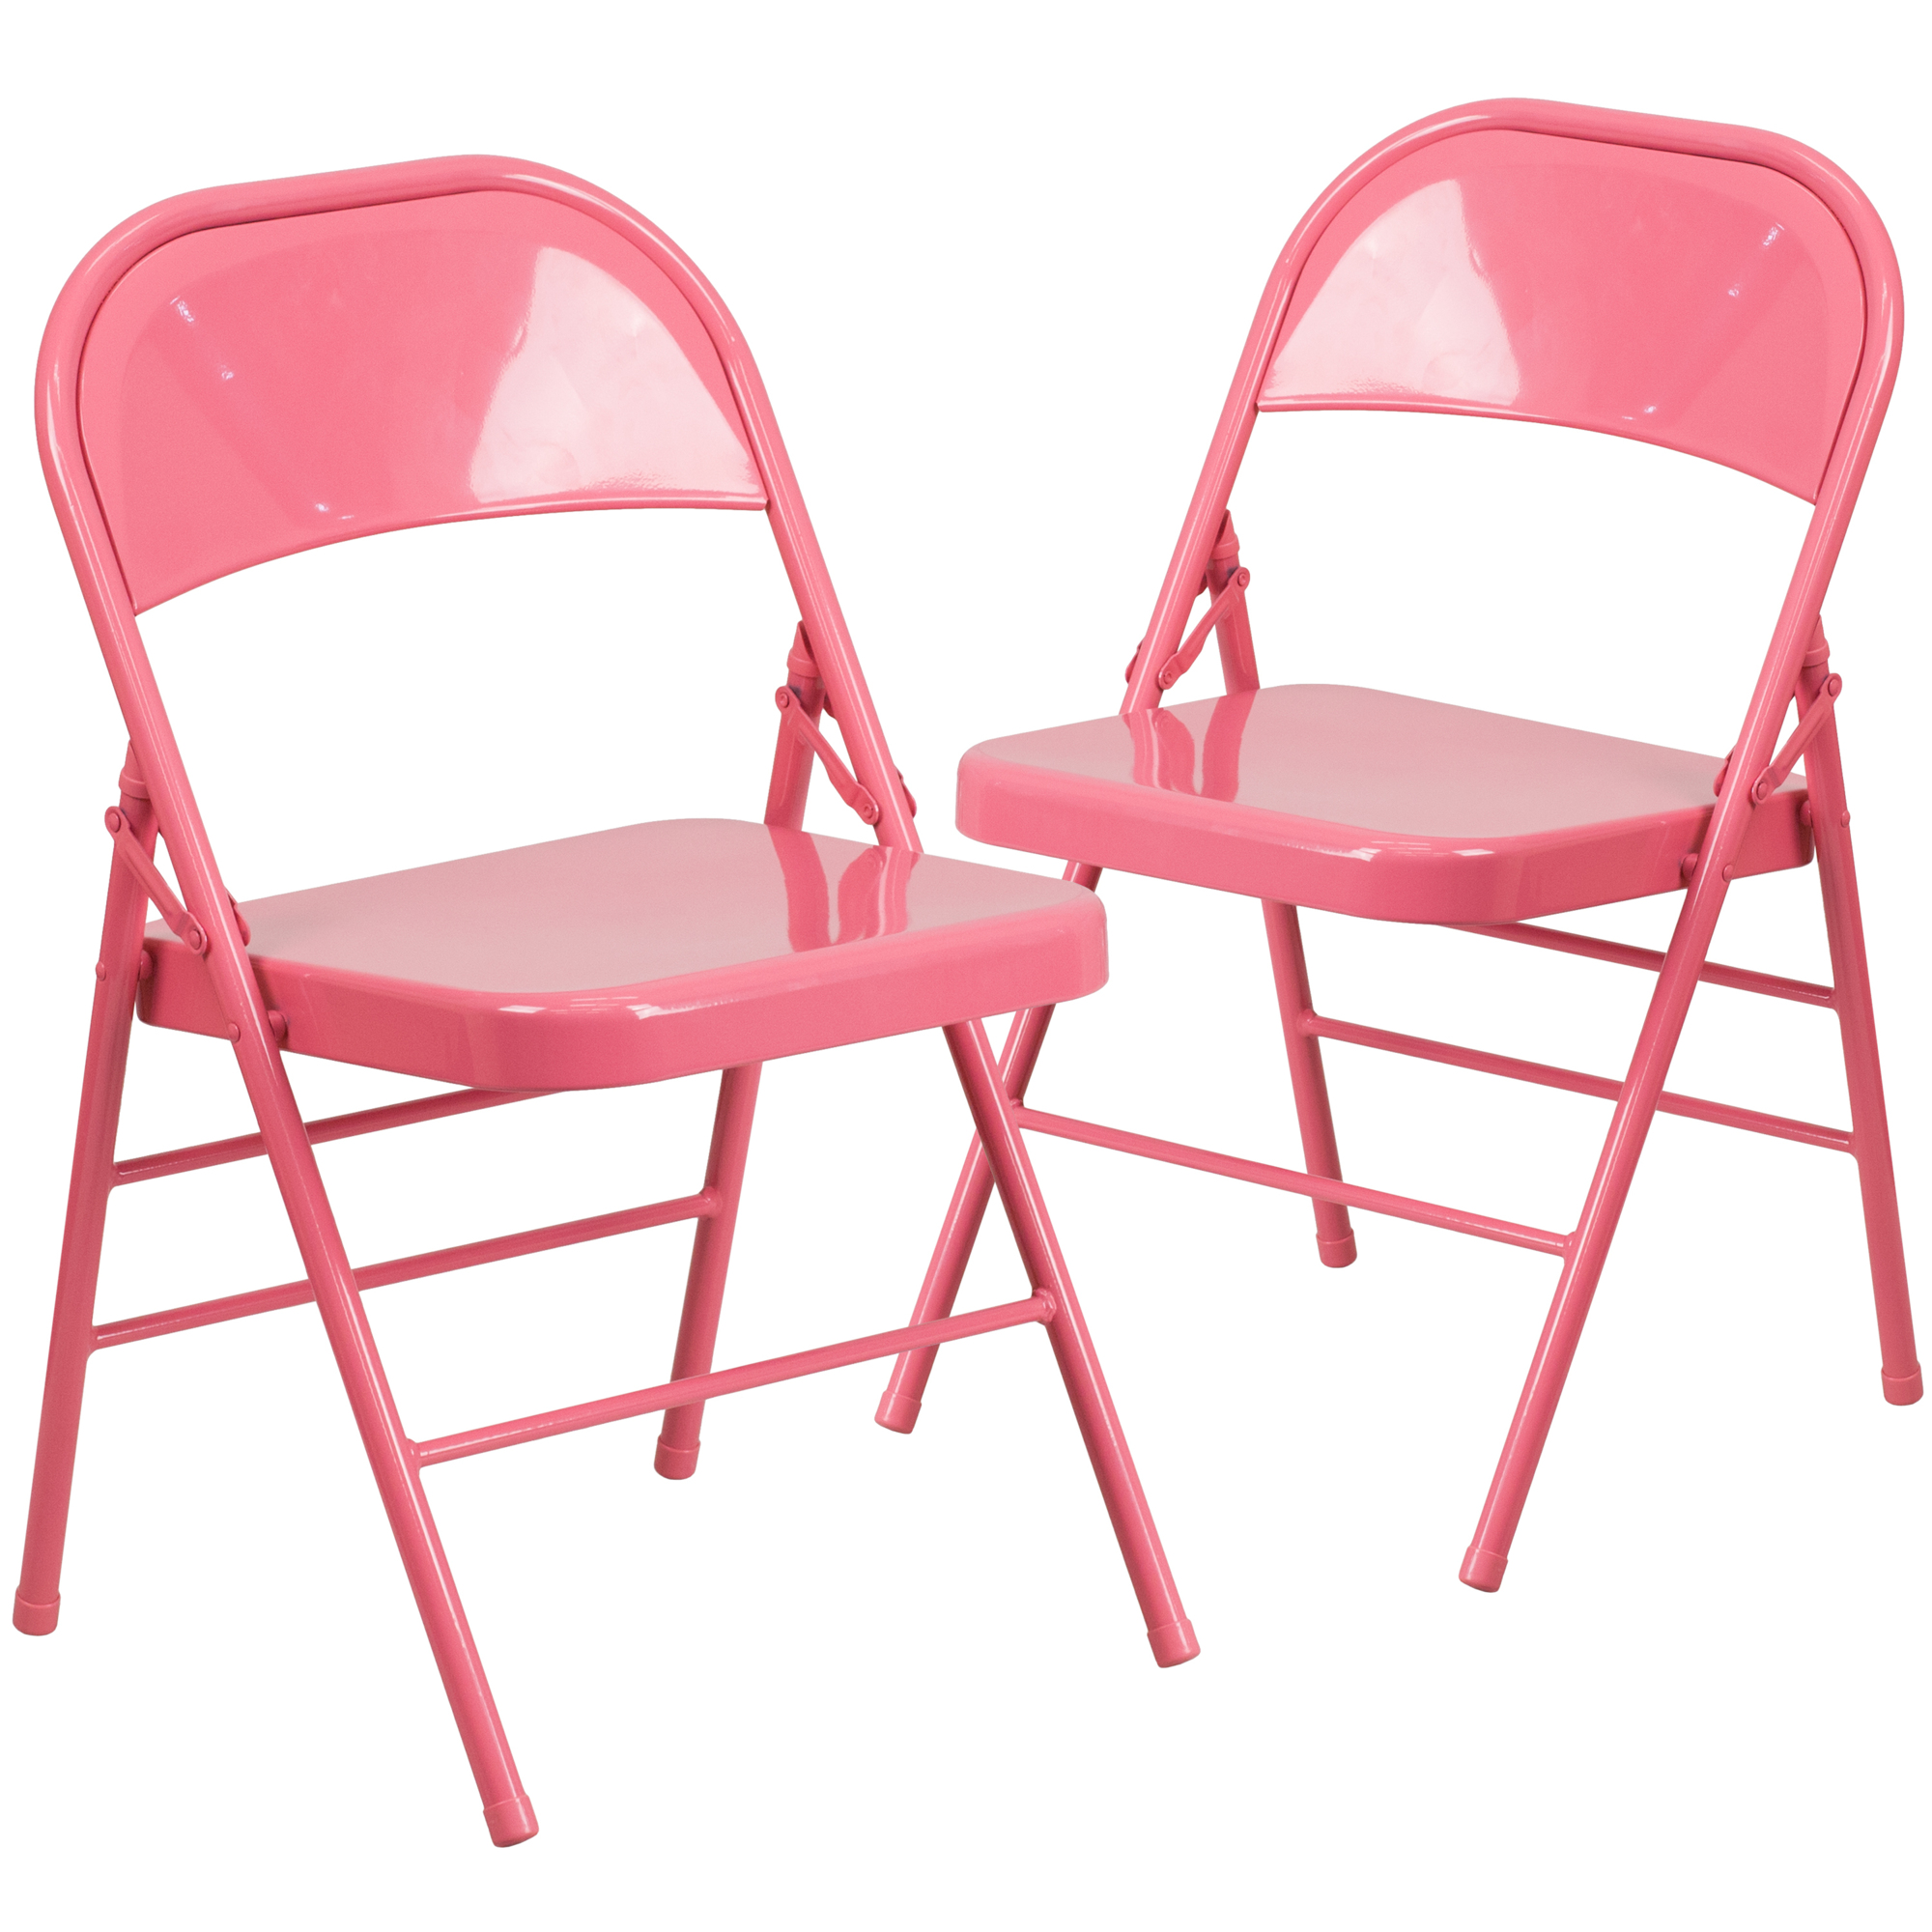 Flash Furniture, Bubblegum Pink Triple Braced Metal Folding Chair, Primary Color Pink, Included (qty.) 2, Model 2HF3PINK